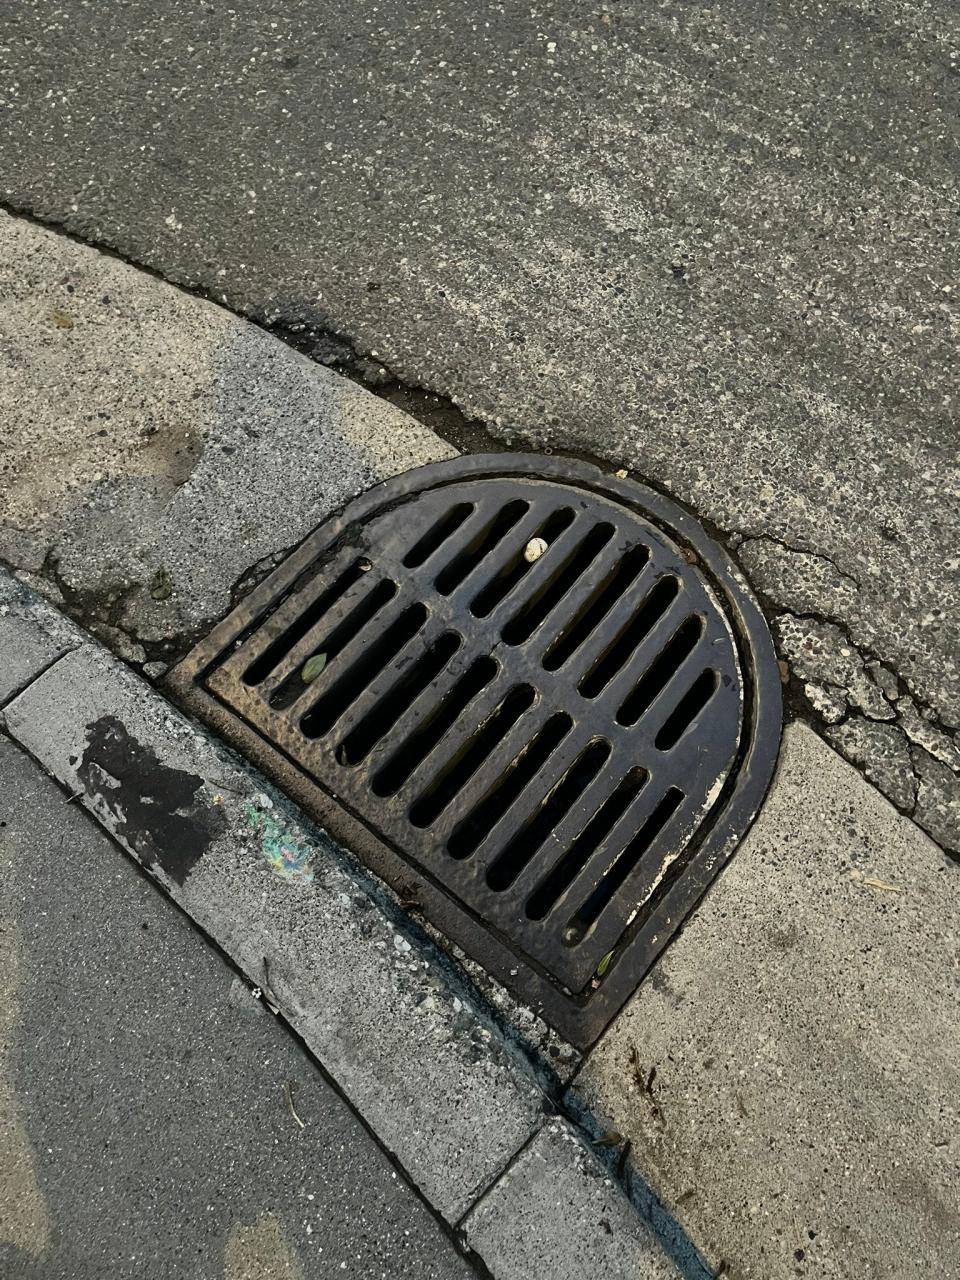 Storm drain grate with a golf ball lodged in the slot